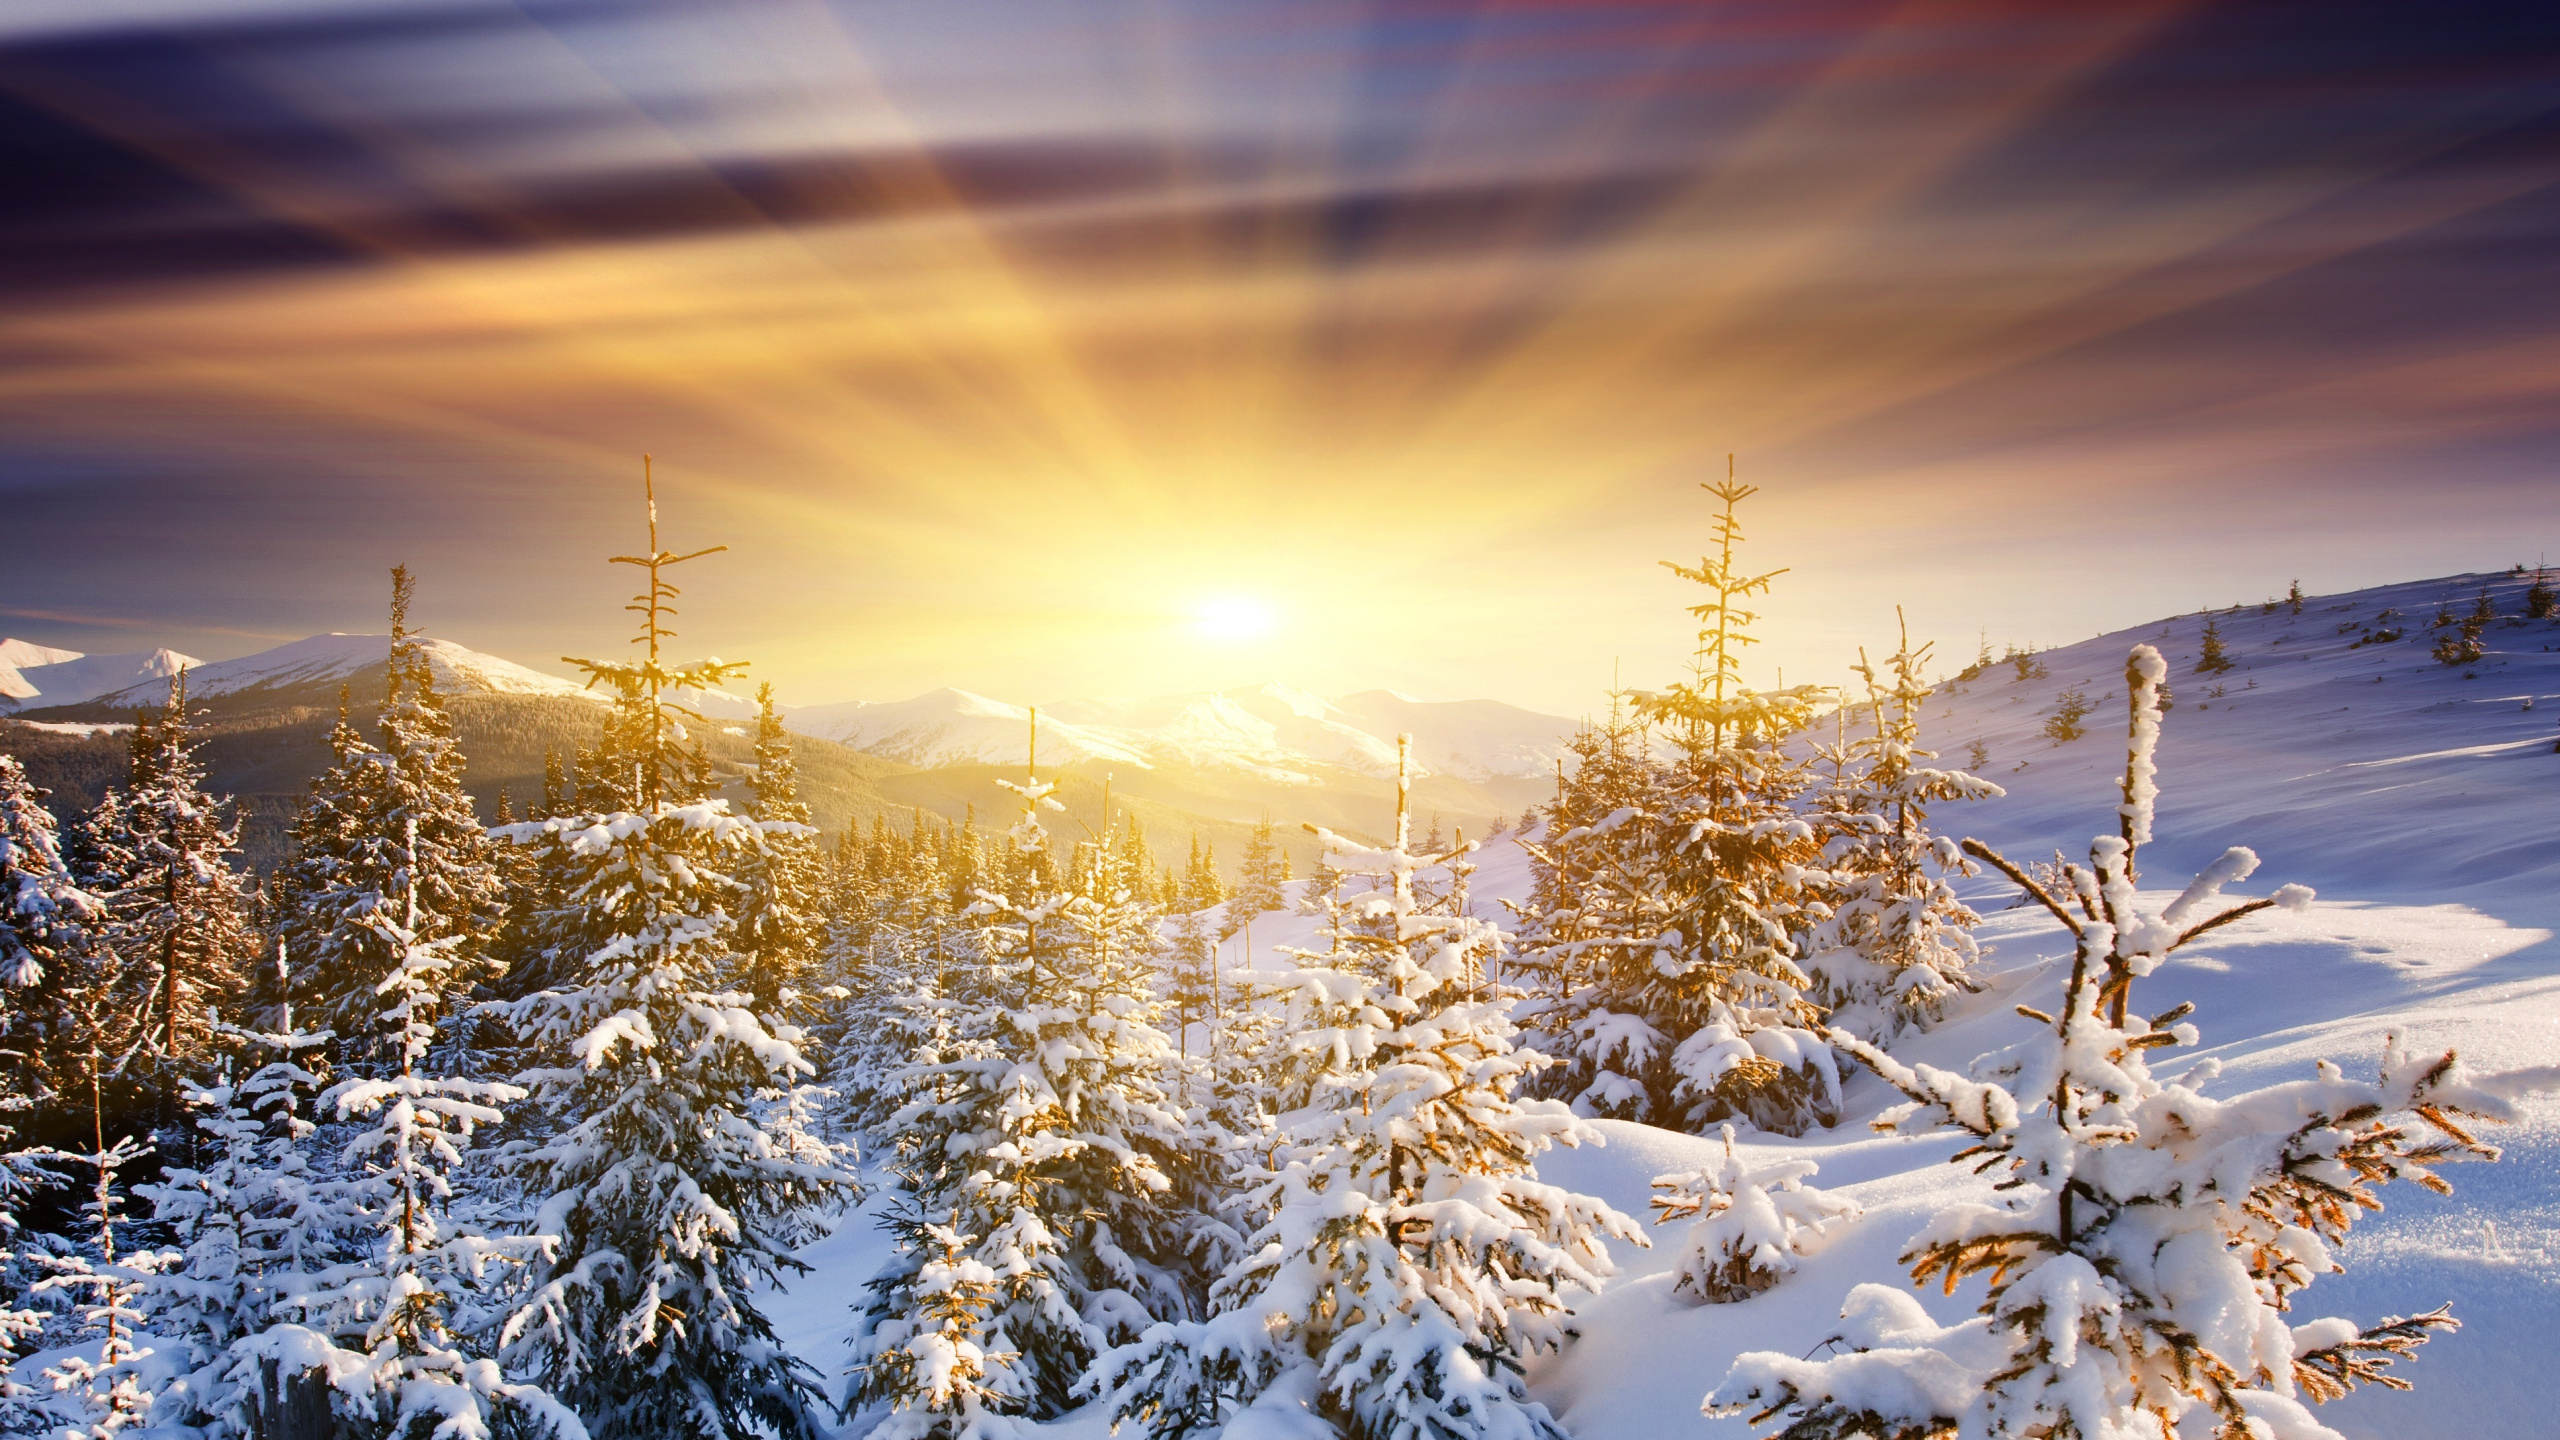 Snow Covered Pine Trees During Sunset. Wallpaper in 2560x1440 Resolution